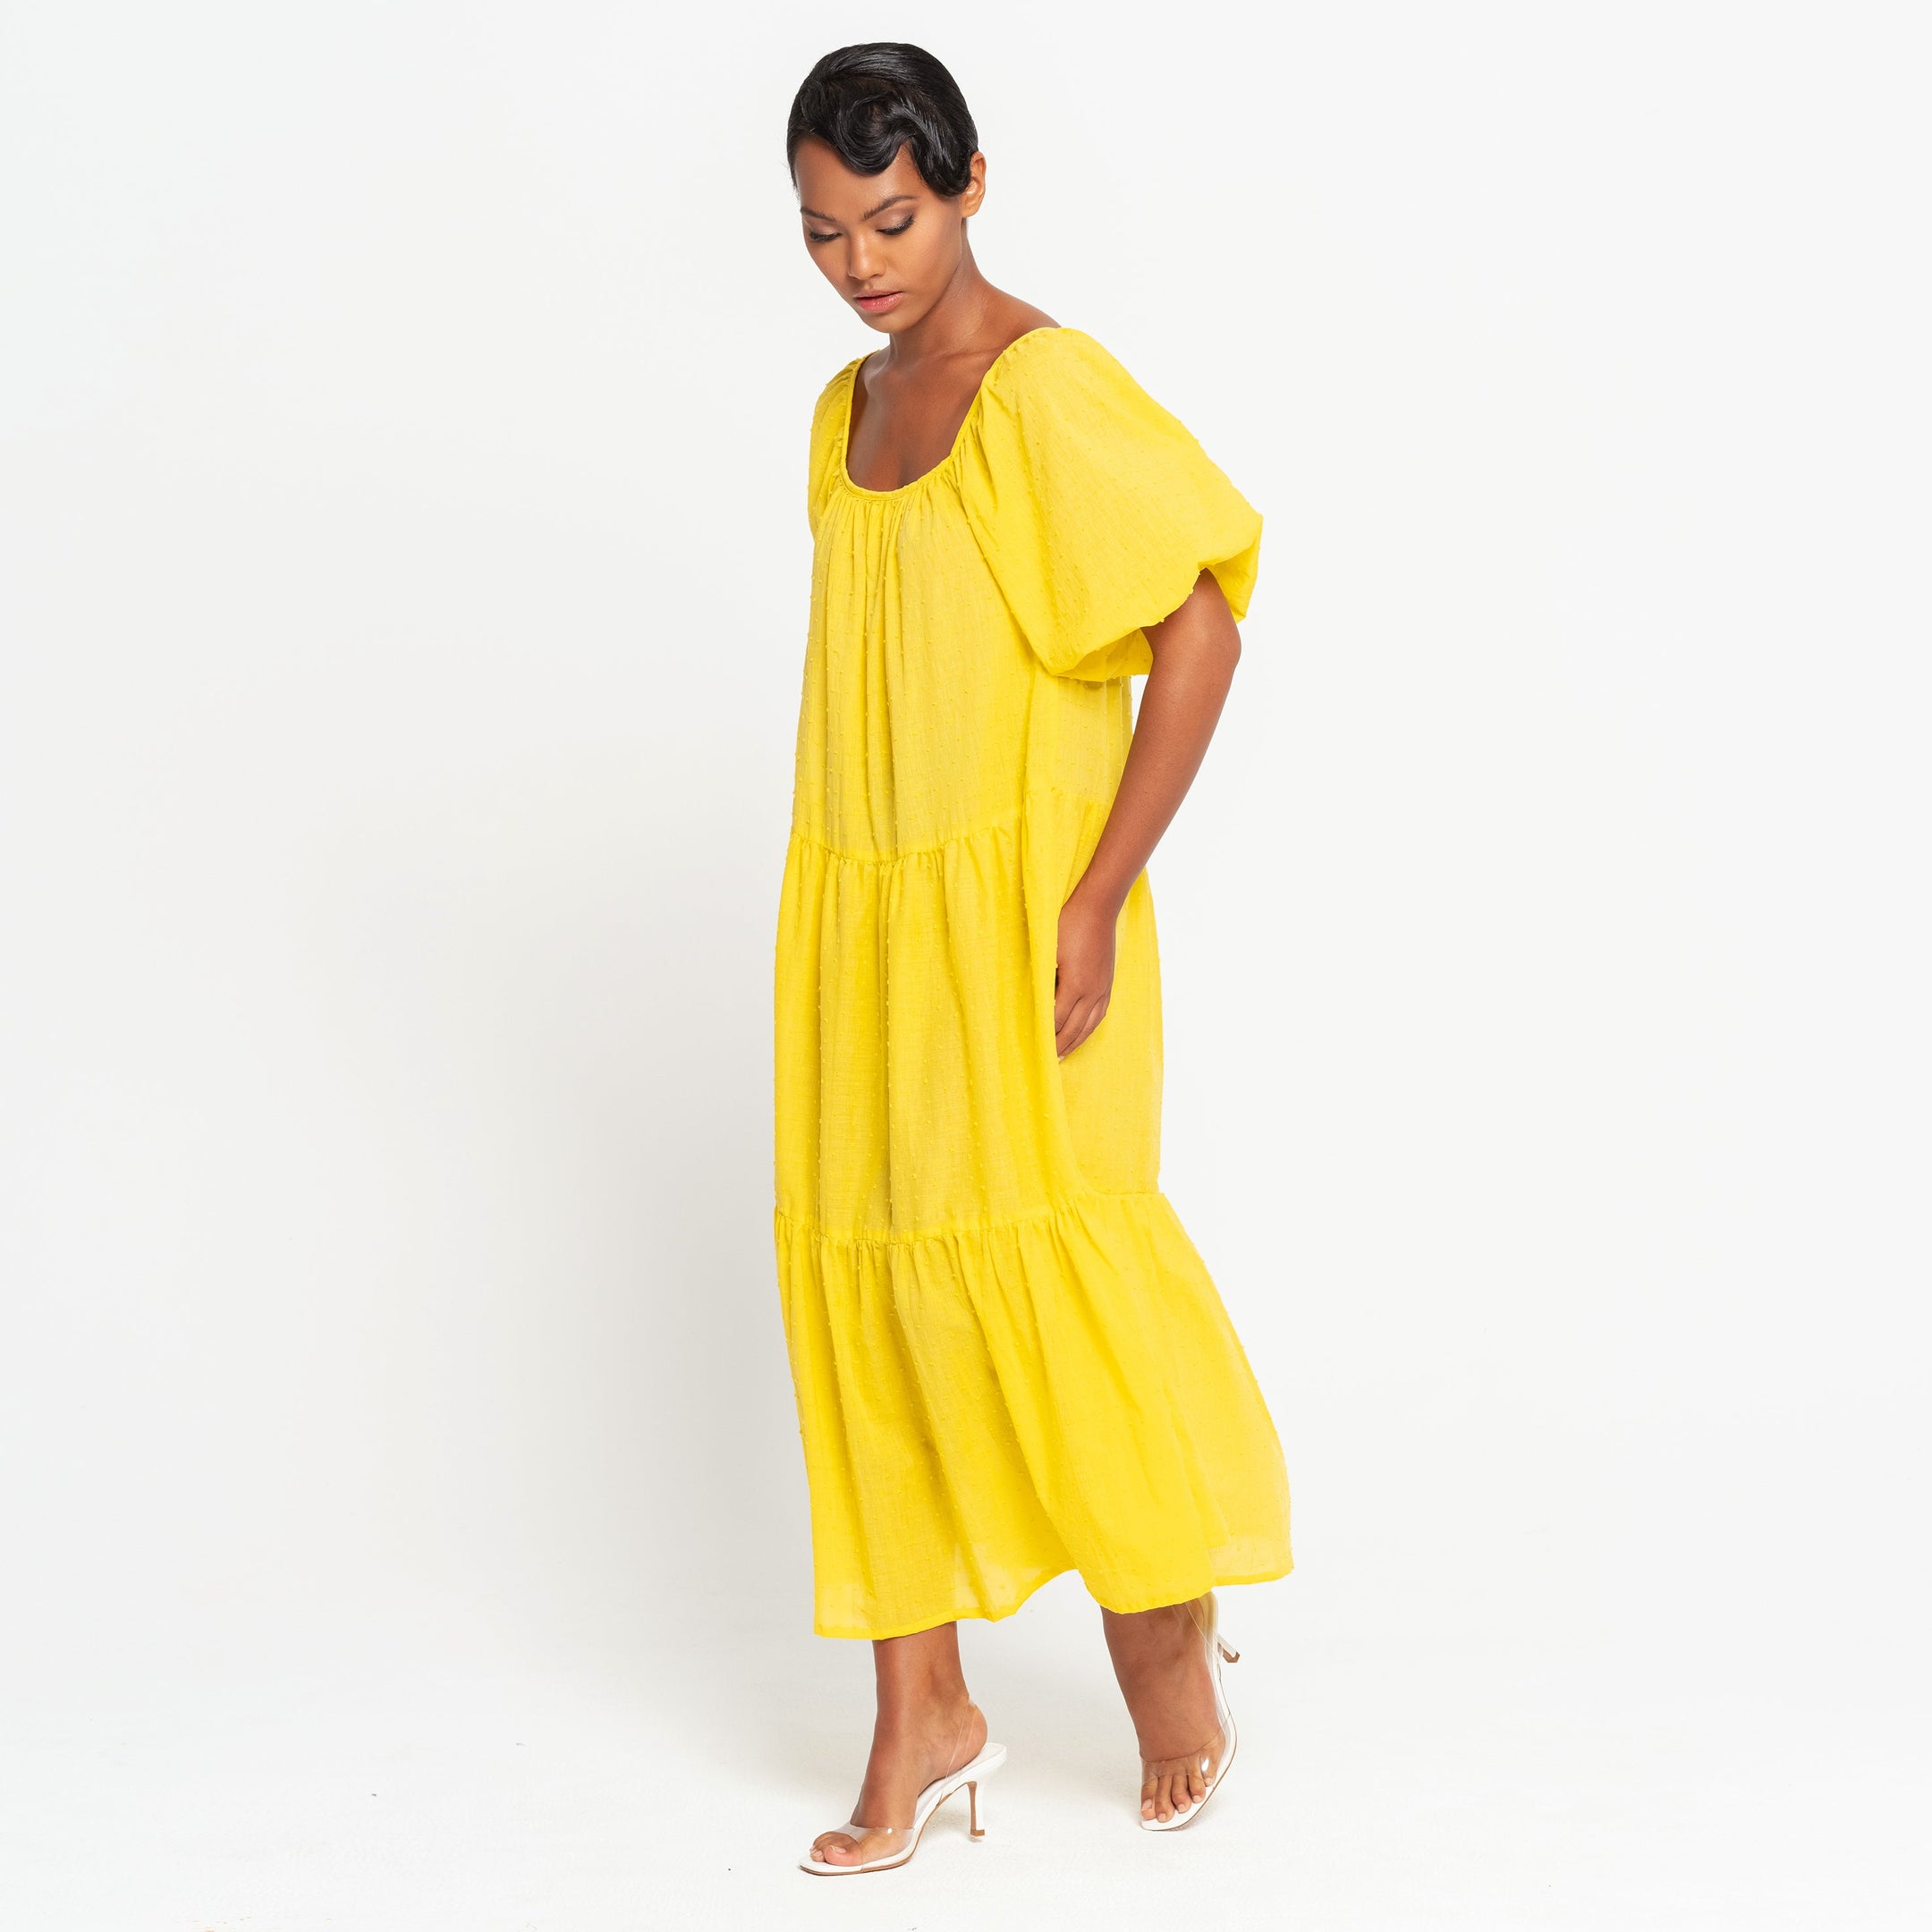 Buy ROSEMARY Dotted Cotton Dress, in Sunflower Yellow by BrunnaCo